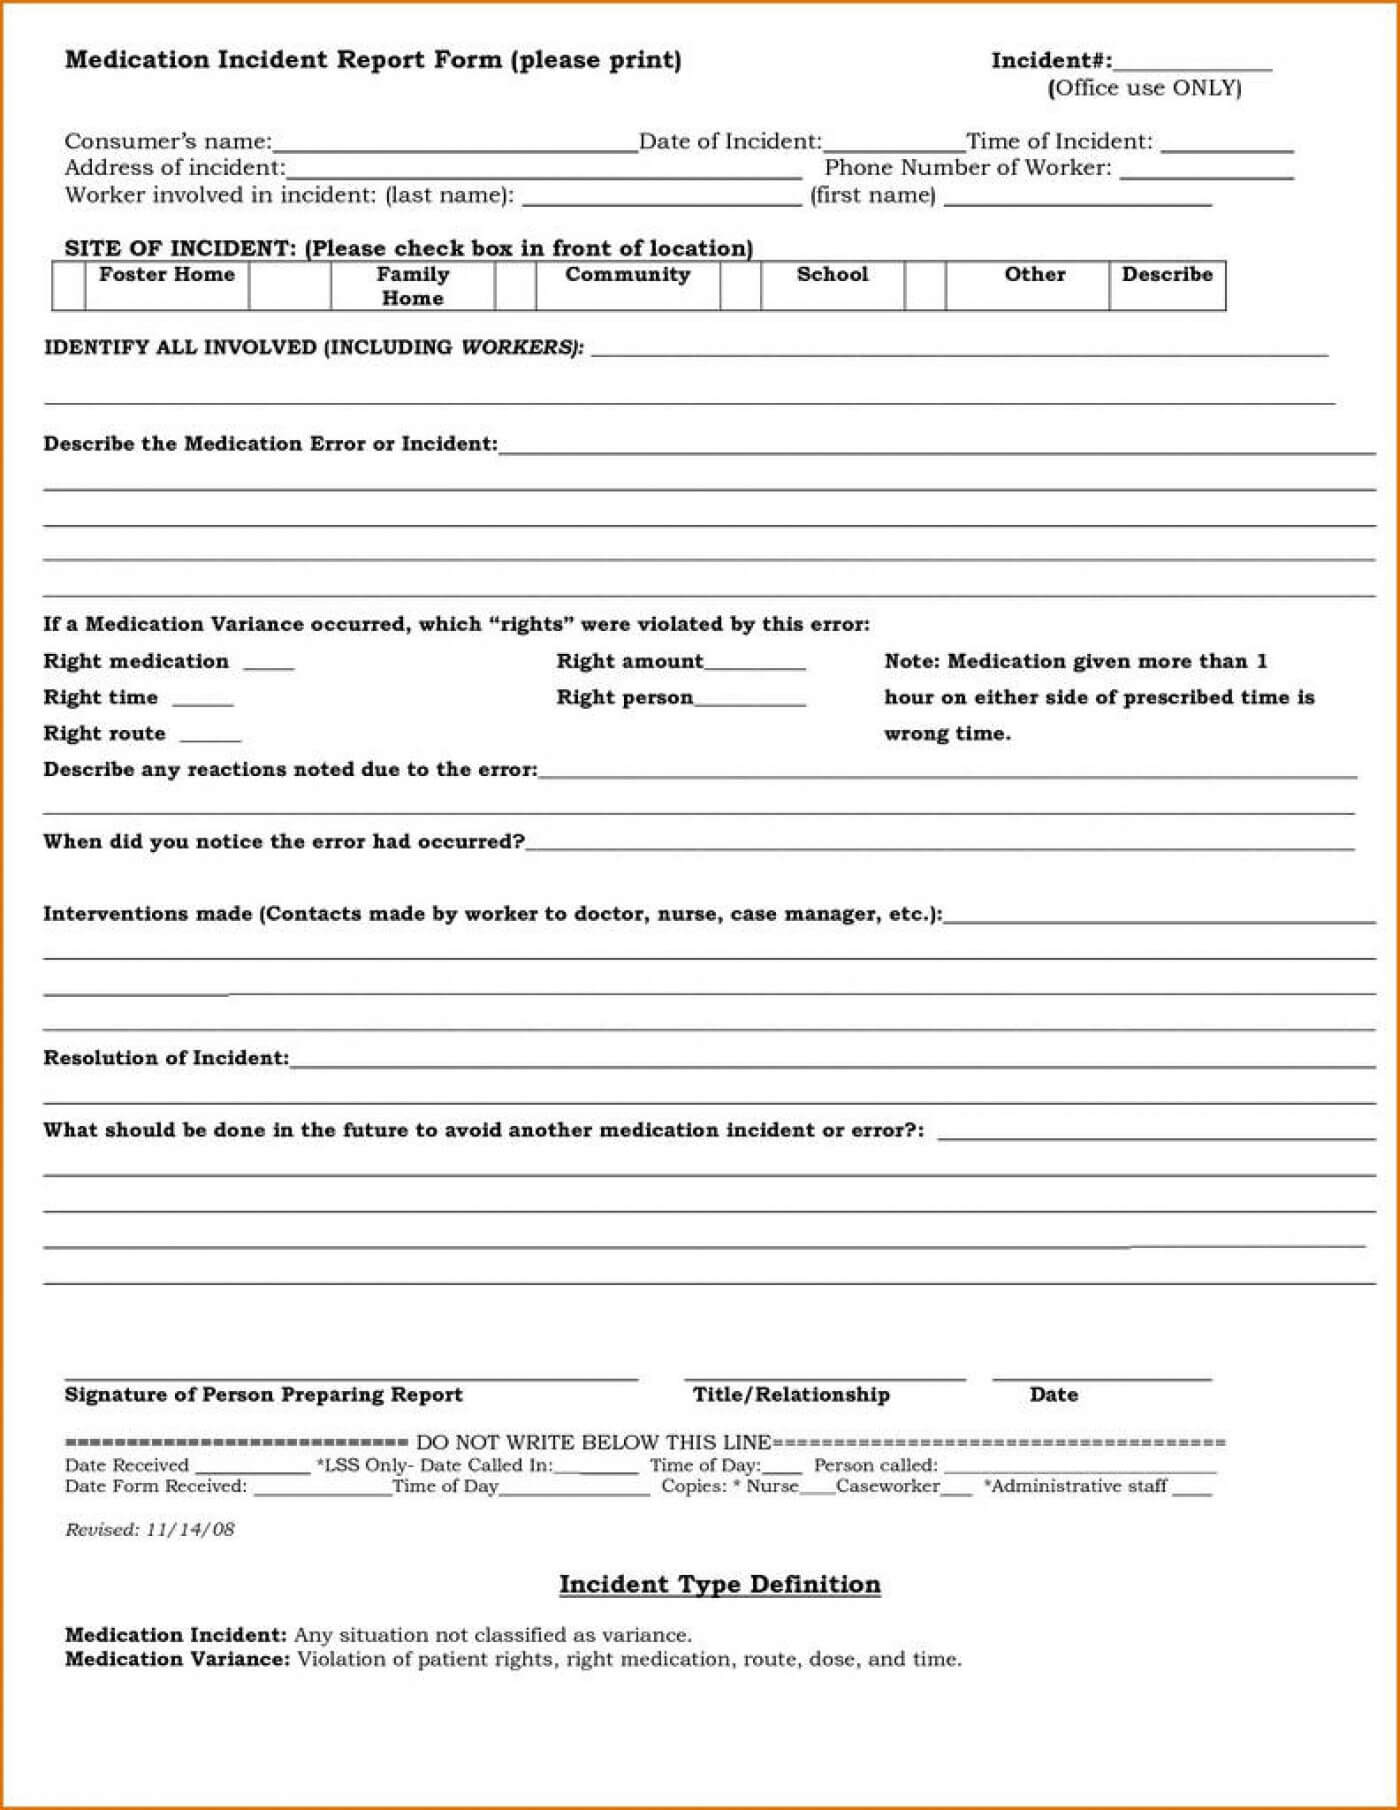 036 Medication Release Form Template Medical Forms Ideas Regarding Medication Incident Report Form Template